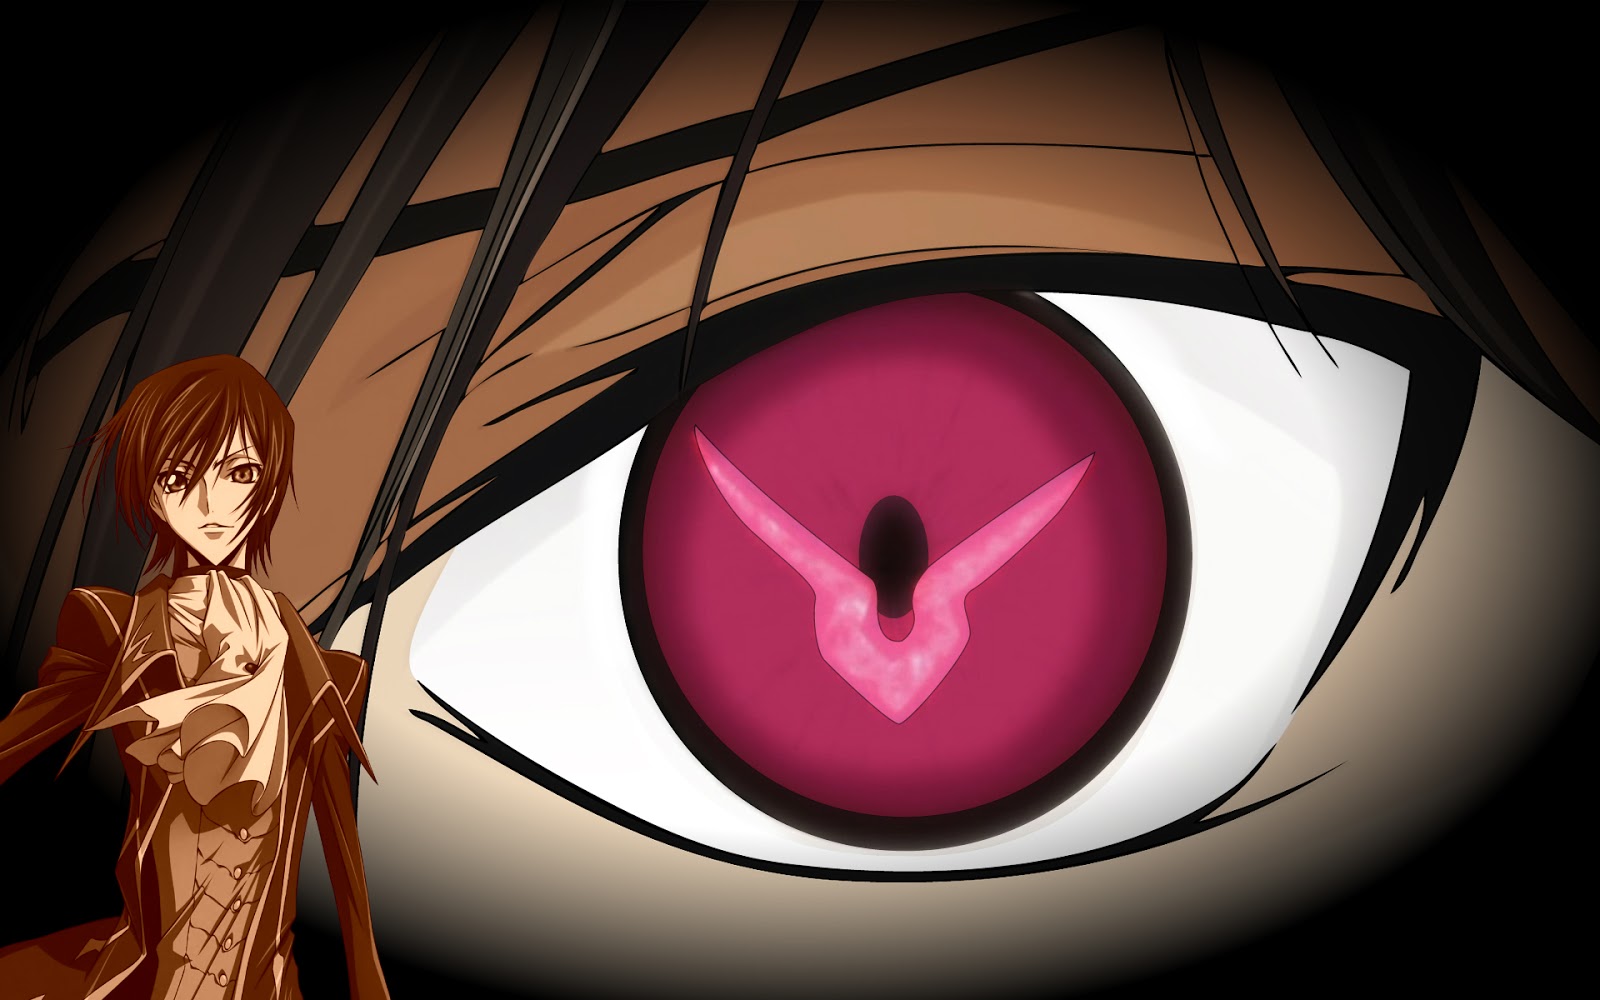 TOP FIVE: TOP FIVE MOST POWERFUL EYES IN ANIME